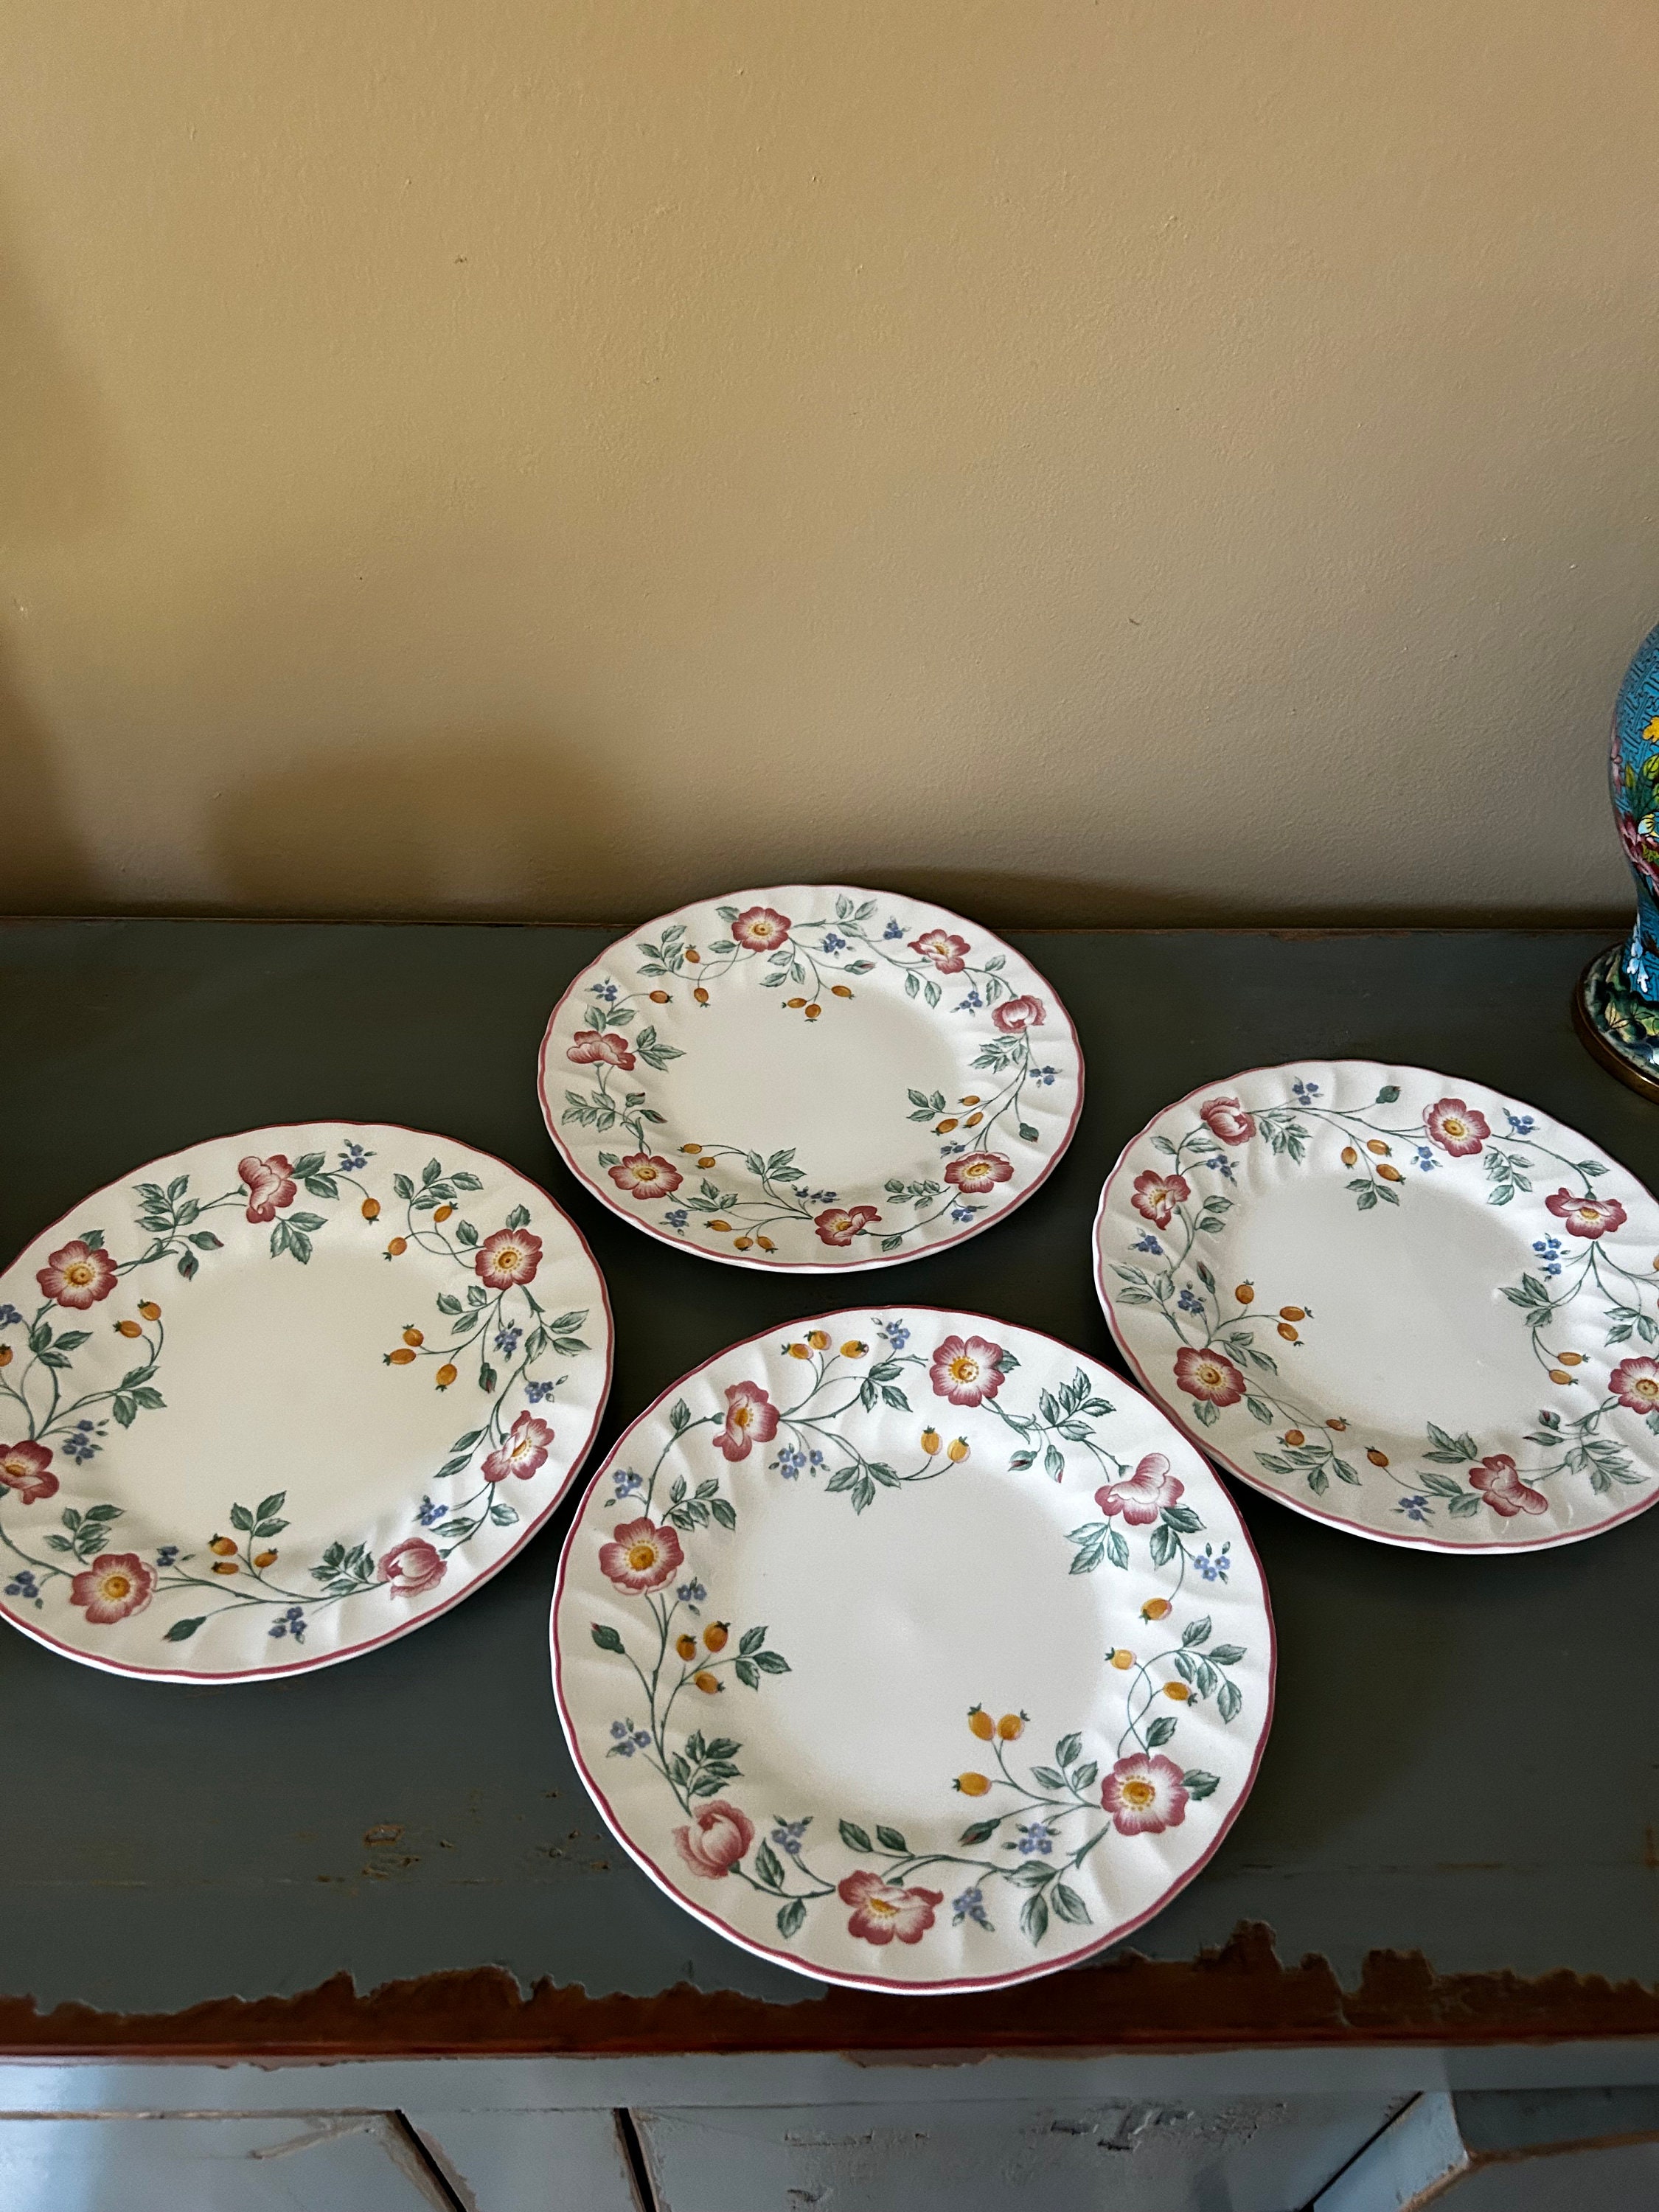 Lot of Vintage Brair Rose Salad Plates by Churchill China, England  Beautiful Floral Pattern 